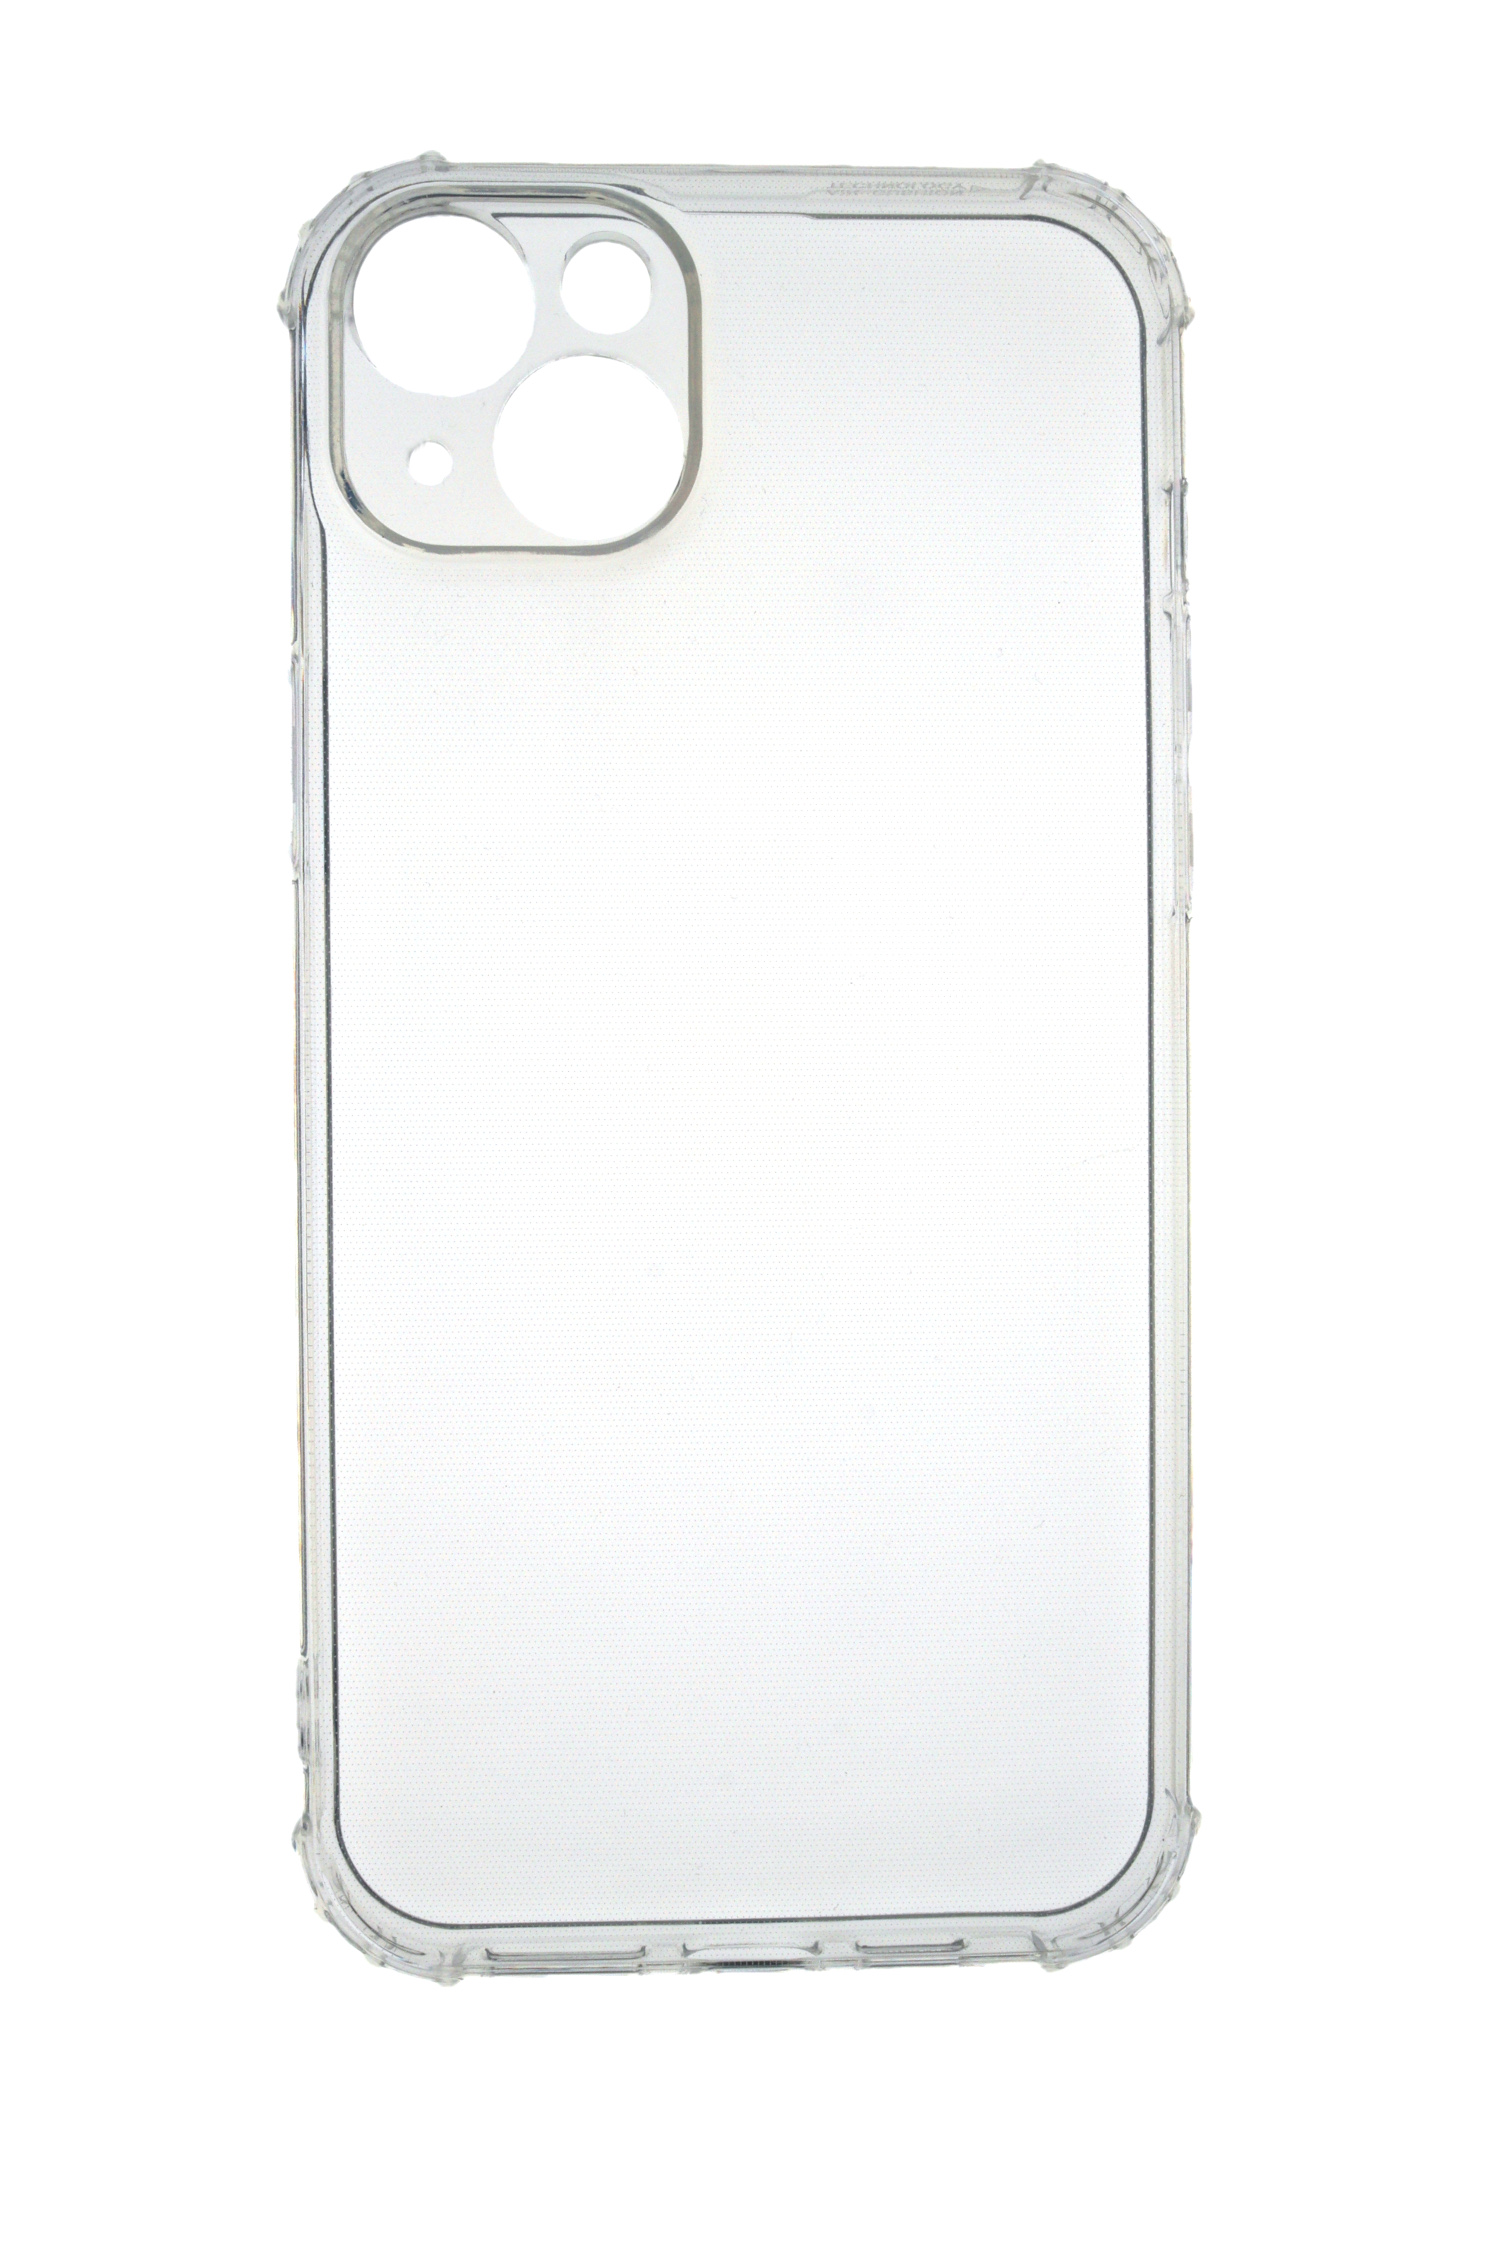 JAMCOVER 1.5 Apple, Shock Plus, Case, iPhone Transparent Backcover, Anti mm 14 TPU